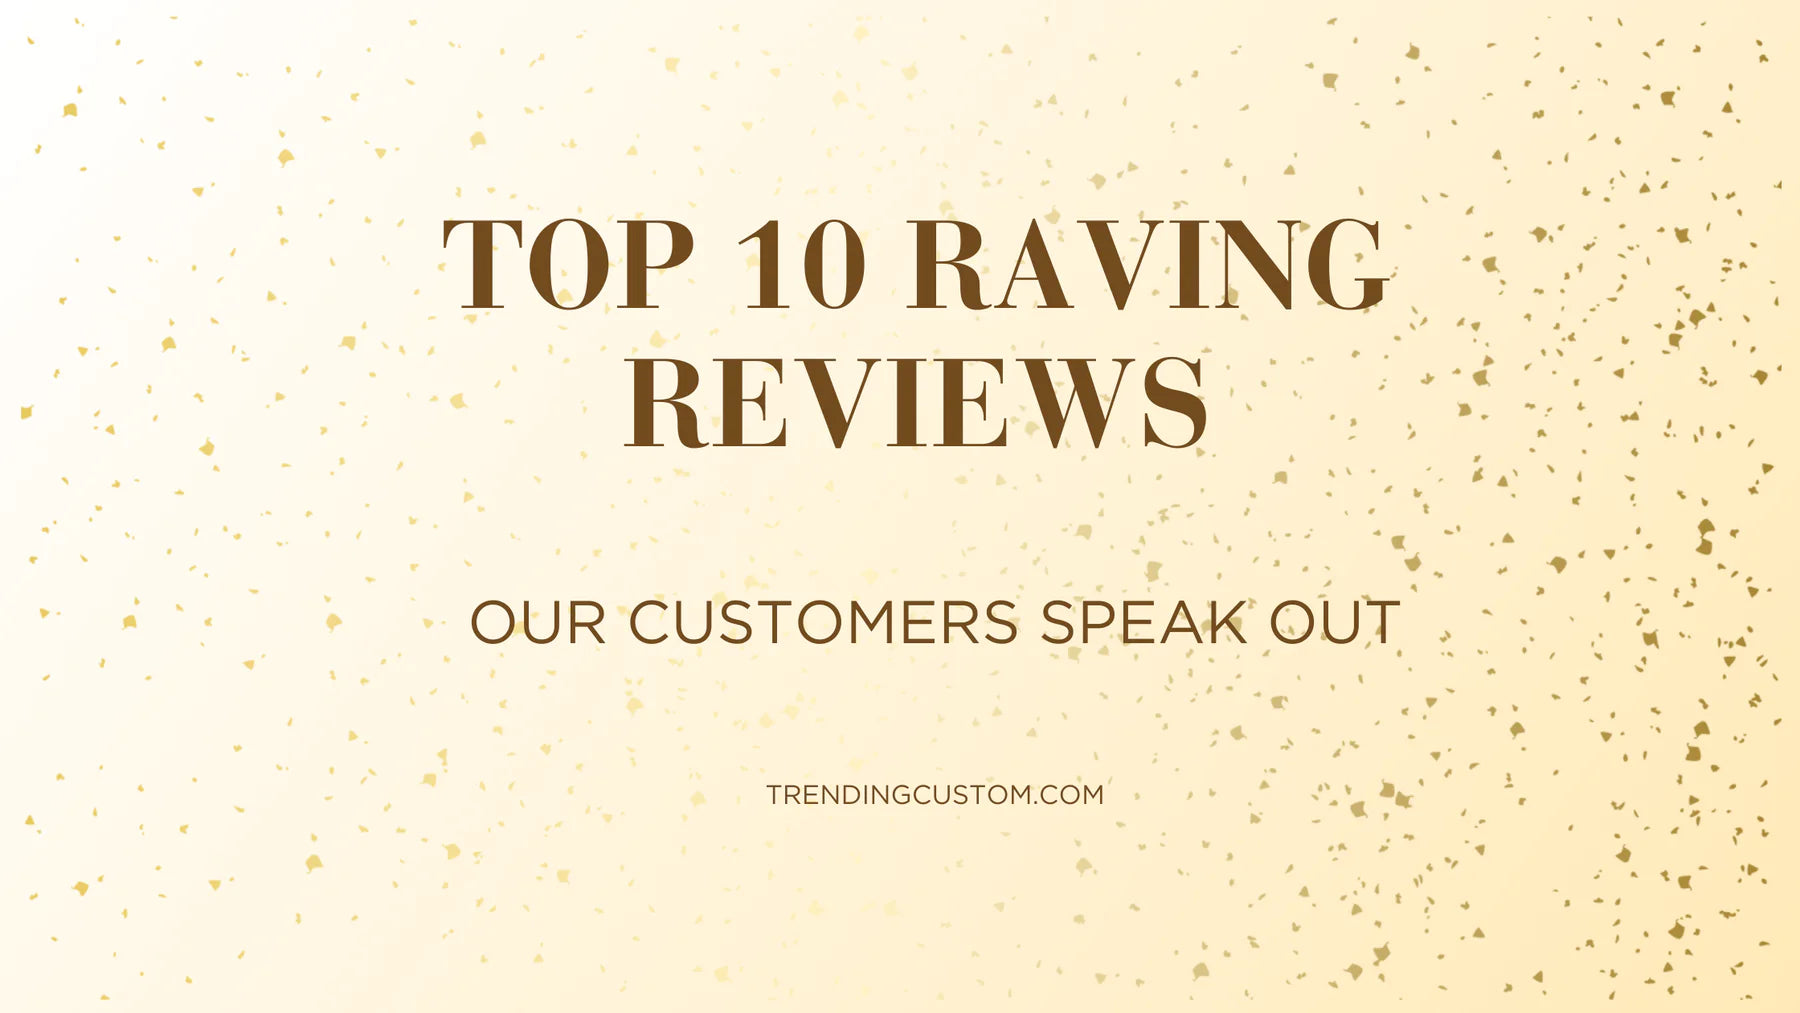 Top 10 Raving Reviews: Our Customers Speak Out! - March 3rd